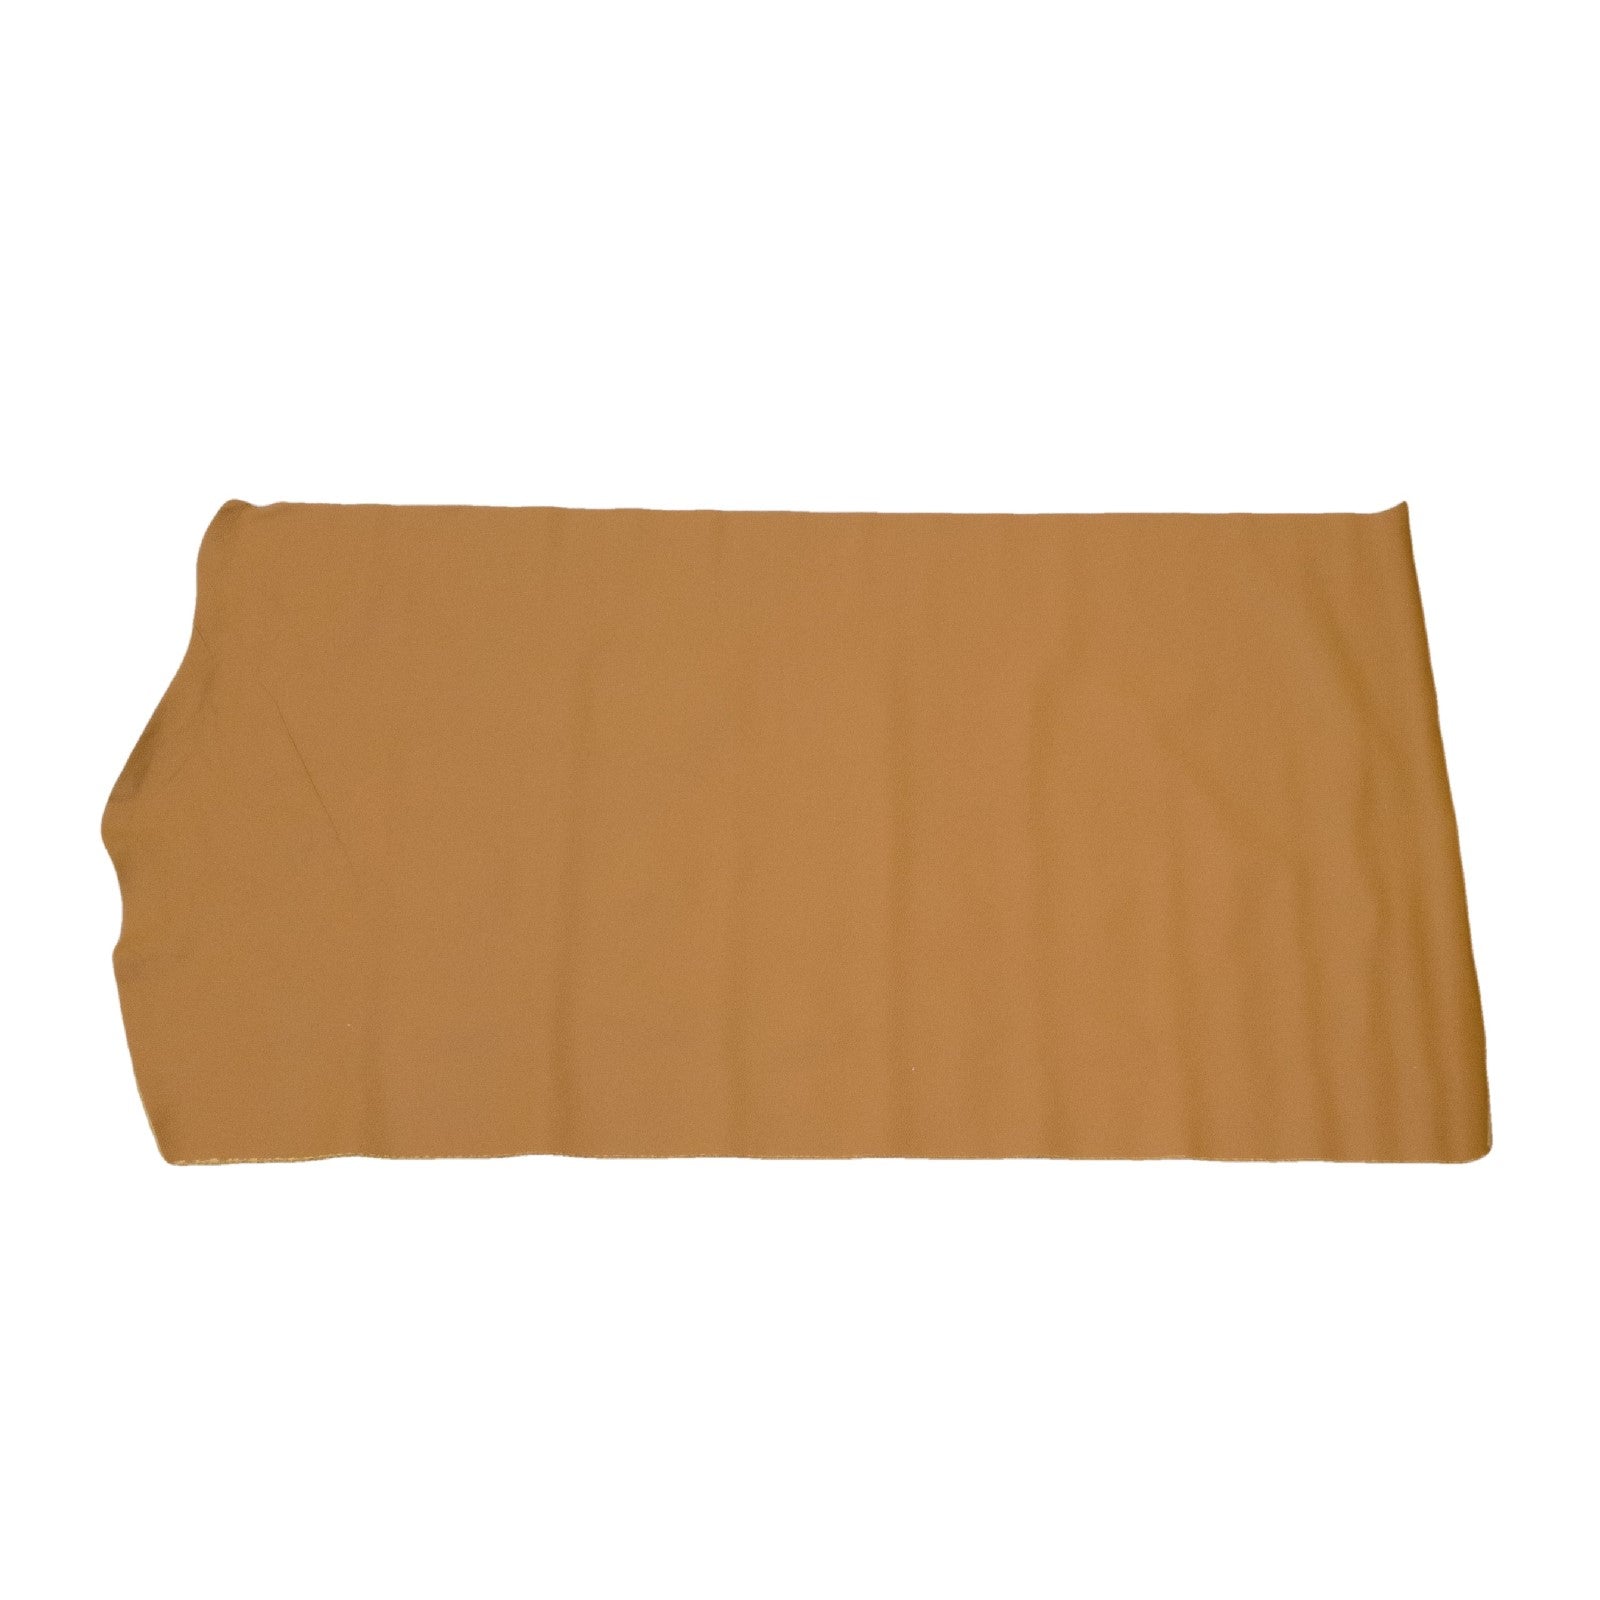 Sweet Caramel, 5.5-23 Sq Ft, 2.5-3 oz Cow Hides, Vital Upholstery Collection, Middle Piece / 5.5-6.5 | The Leather Guy